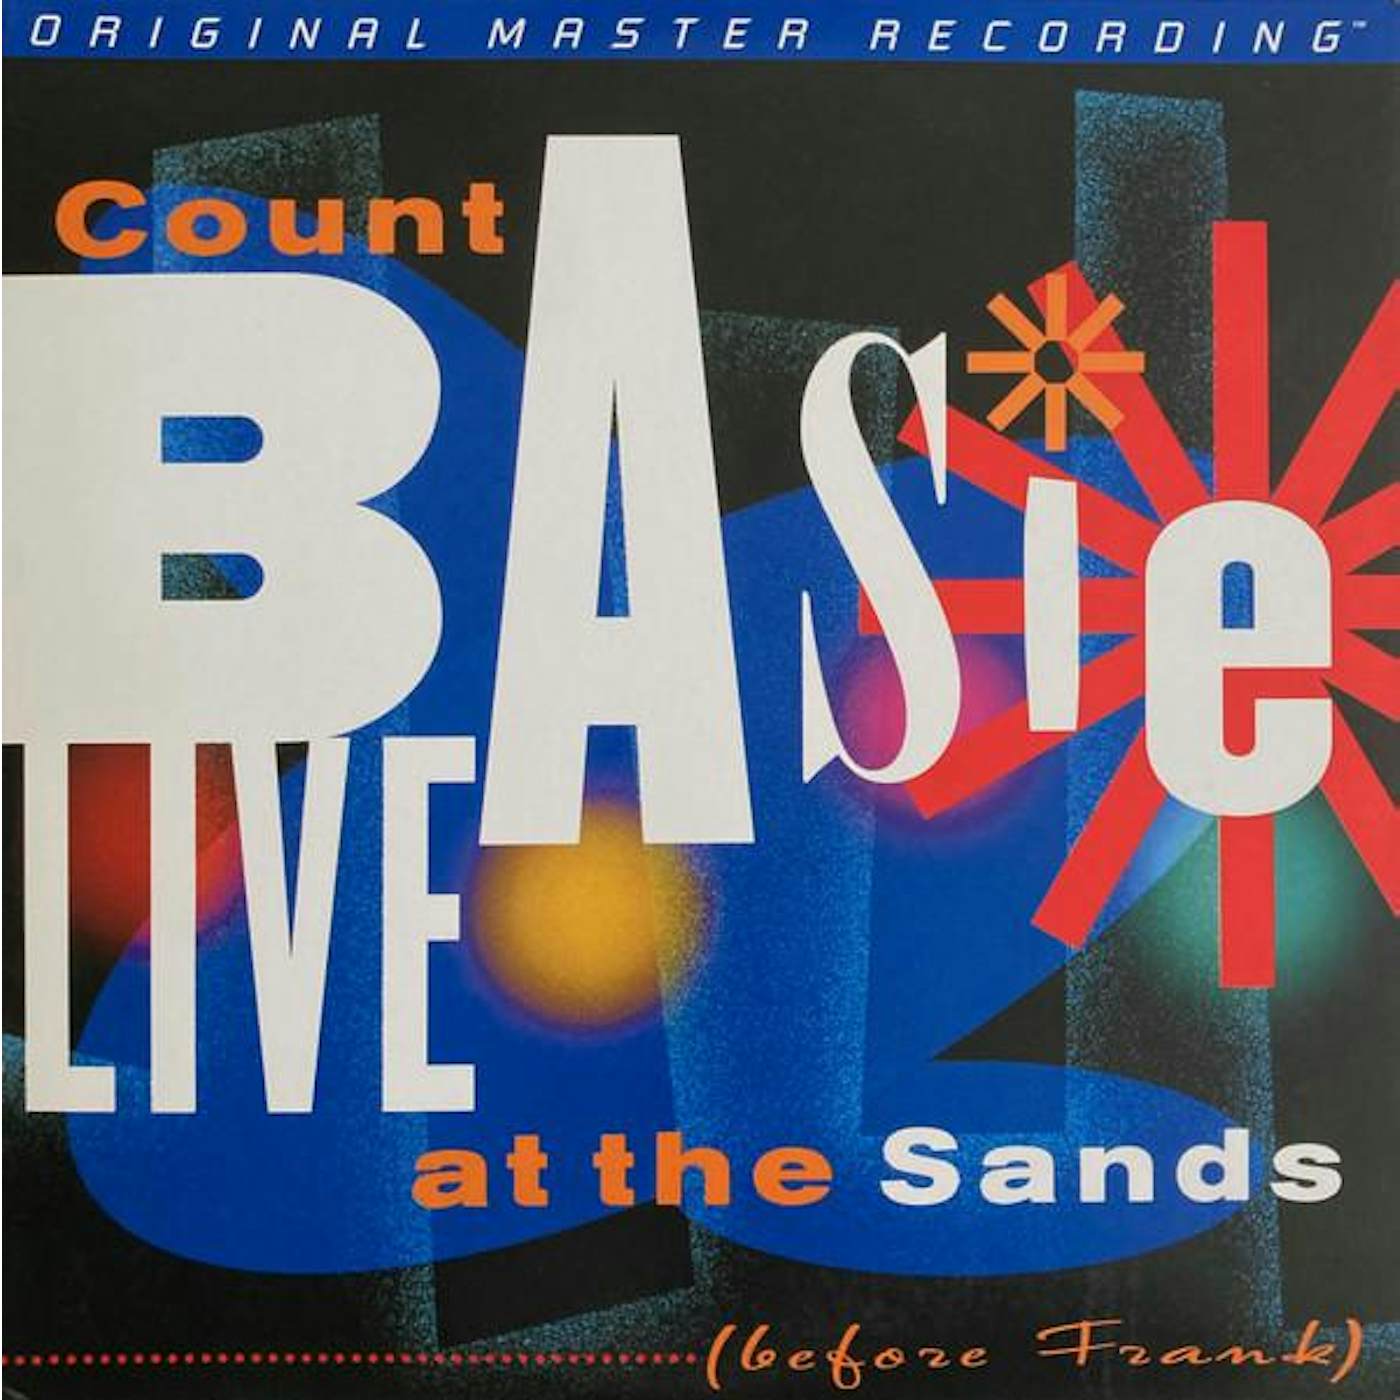 Count Basie LIVE AT THE SANDS (BEFORE FRANK) Vinyl Record